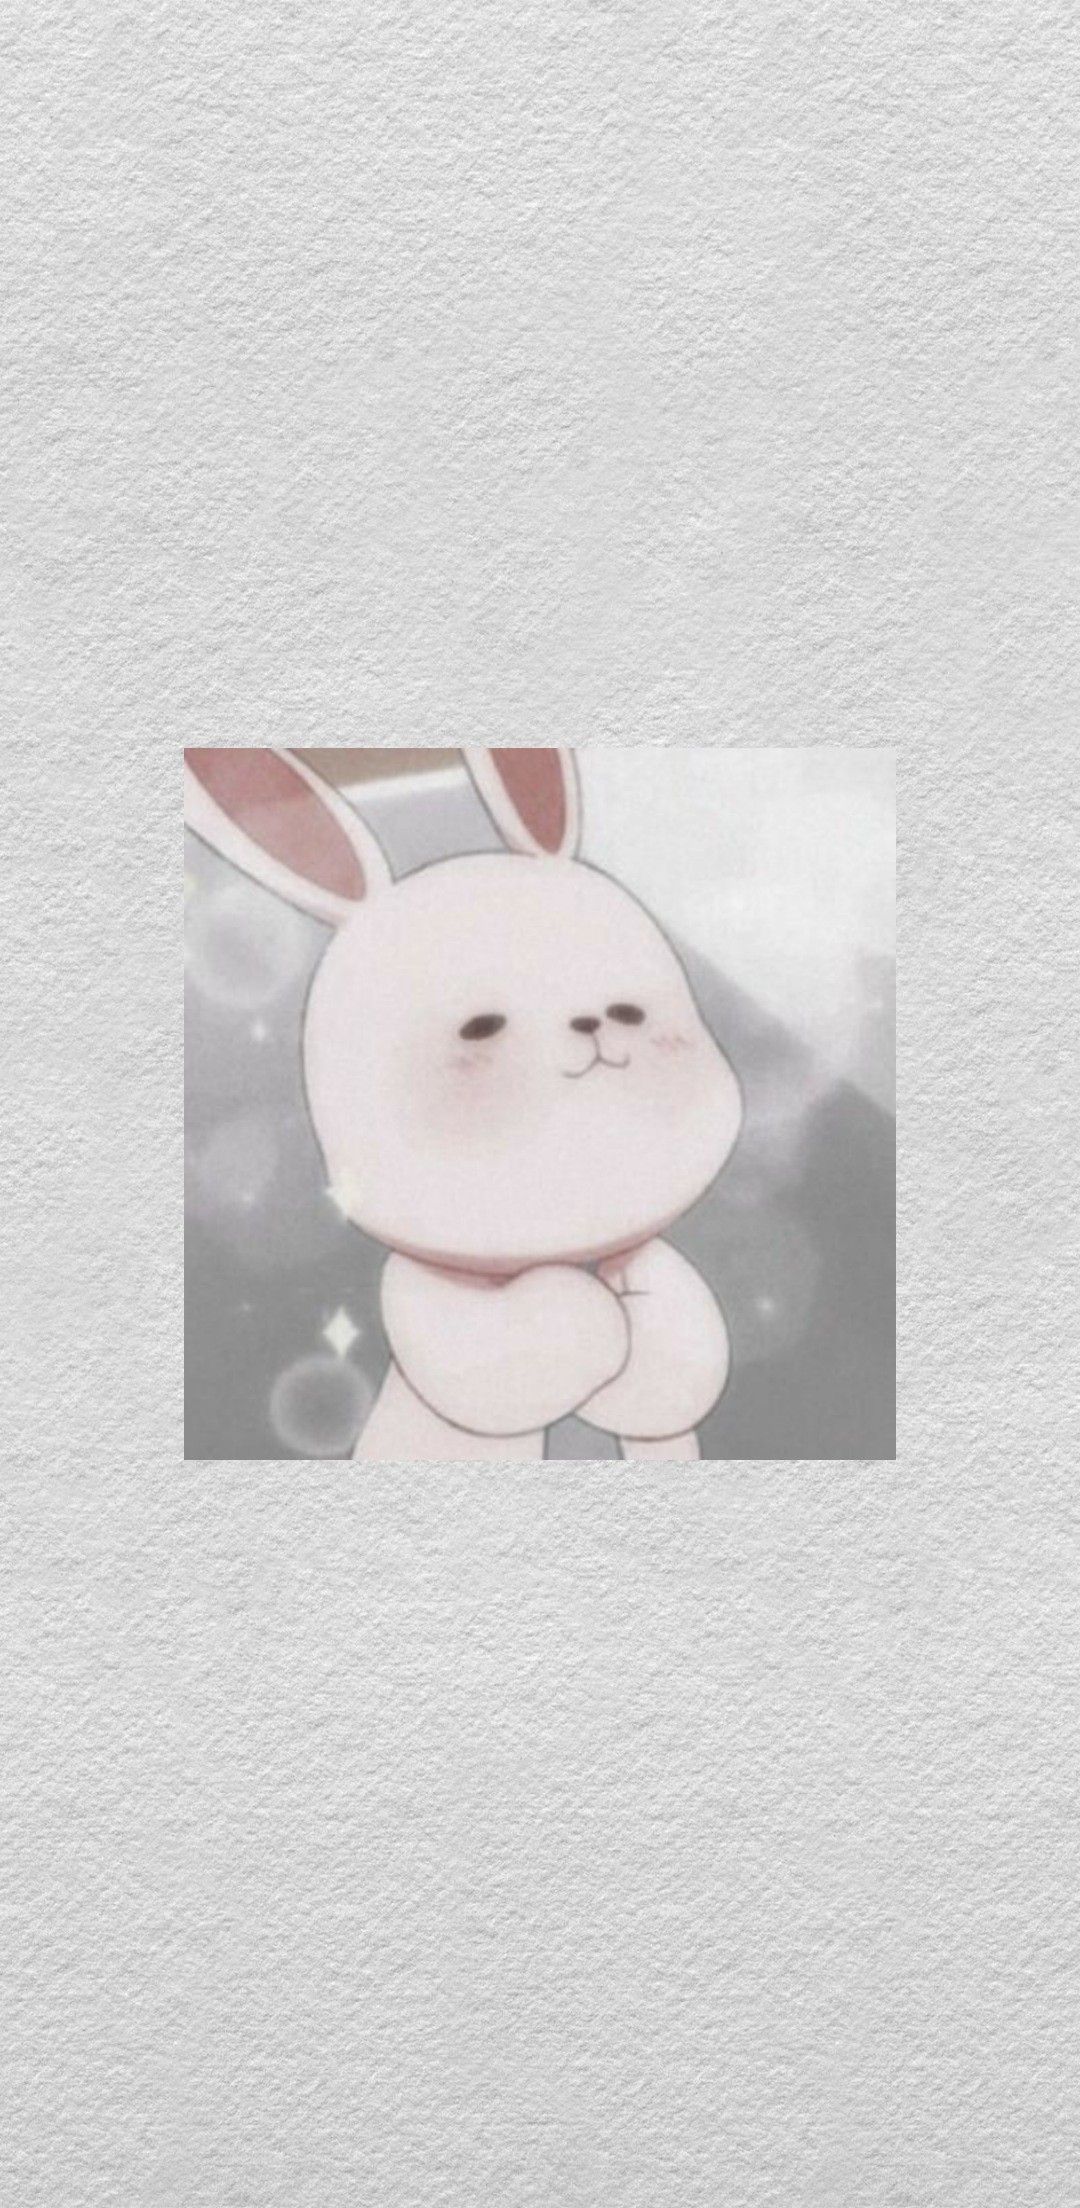  Hasen Hintergrundbild 1080x2208. White cute aesthetic cartoon bunny wallpaper for iPhone and Android. Bunny wallpaper, Rabbit wallpaper, Sanrio wallpaper